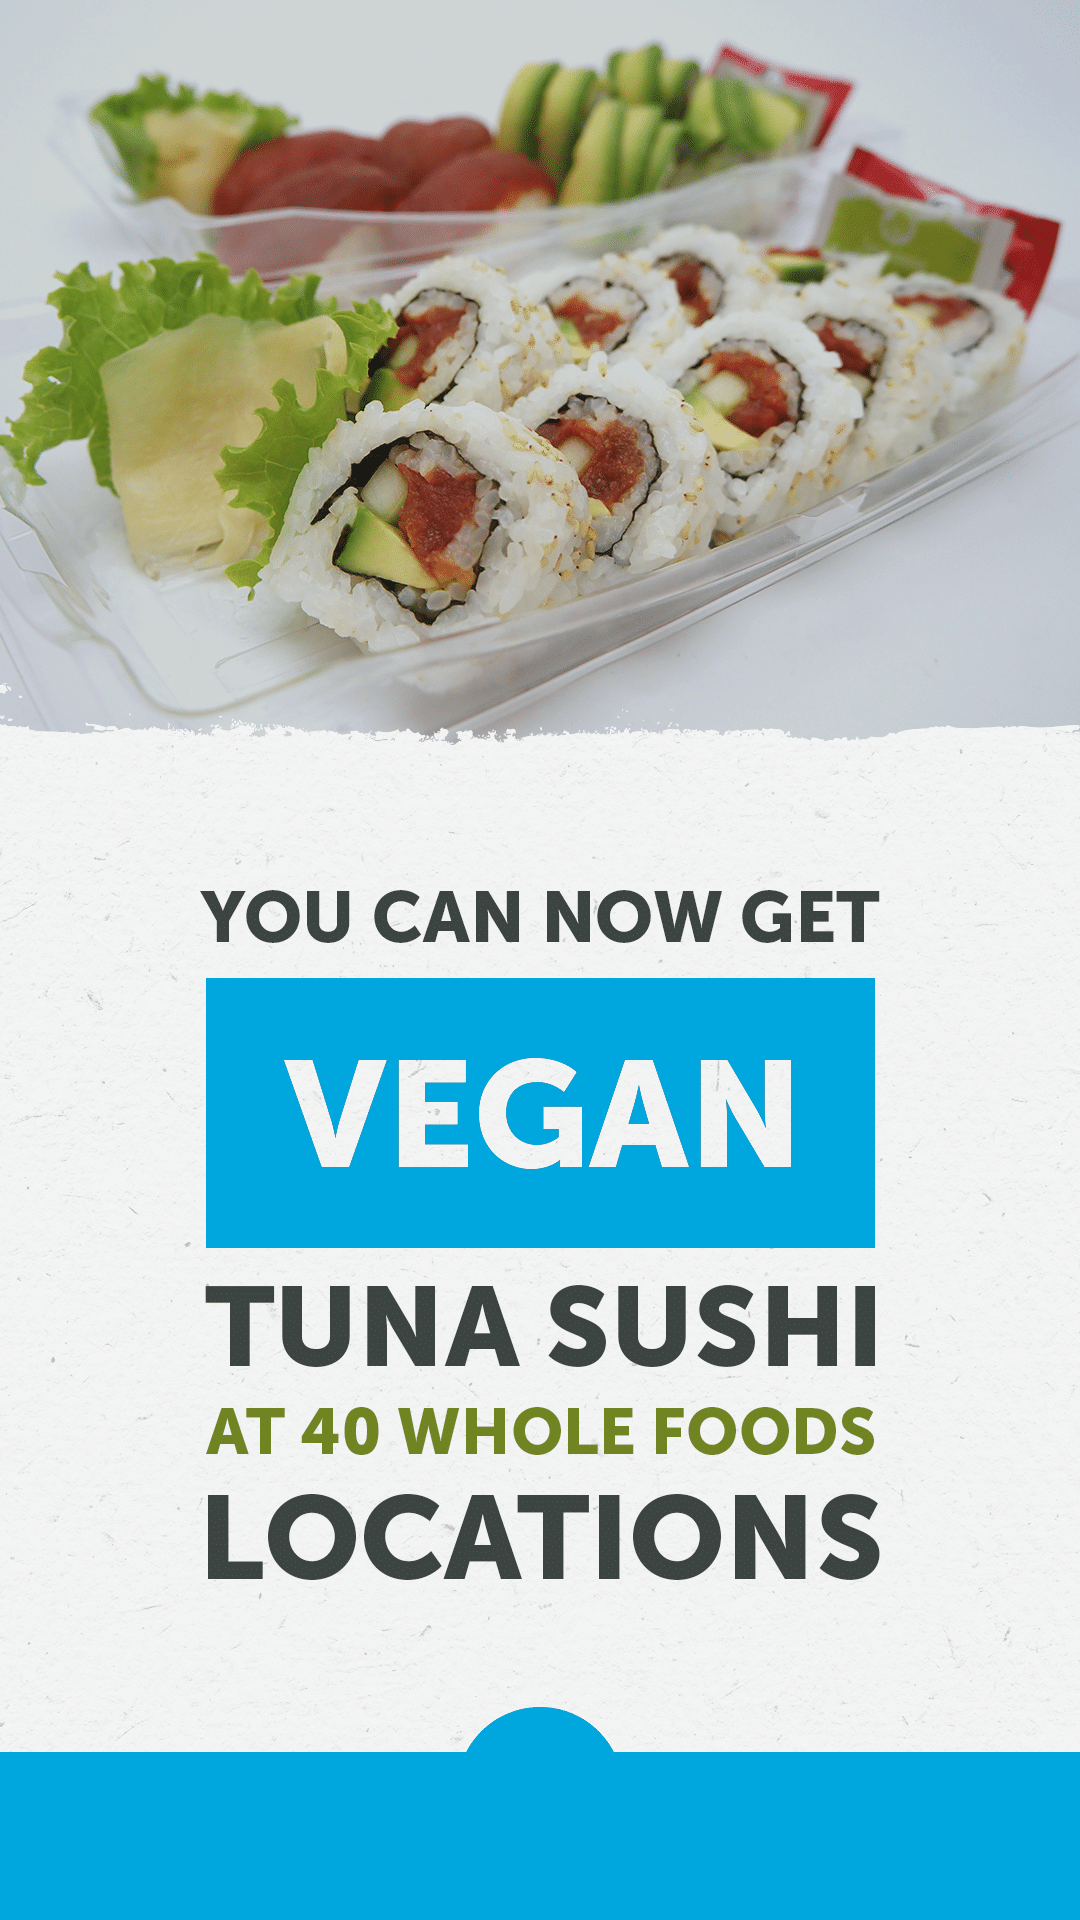 You Can Now Get Vegan Tuna Sushi at 40 Whole Foods Locations